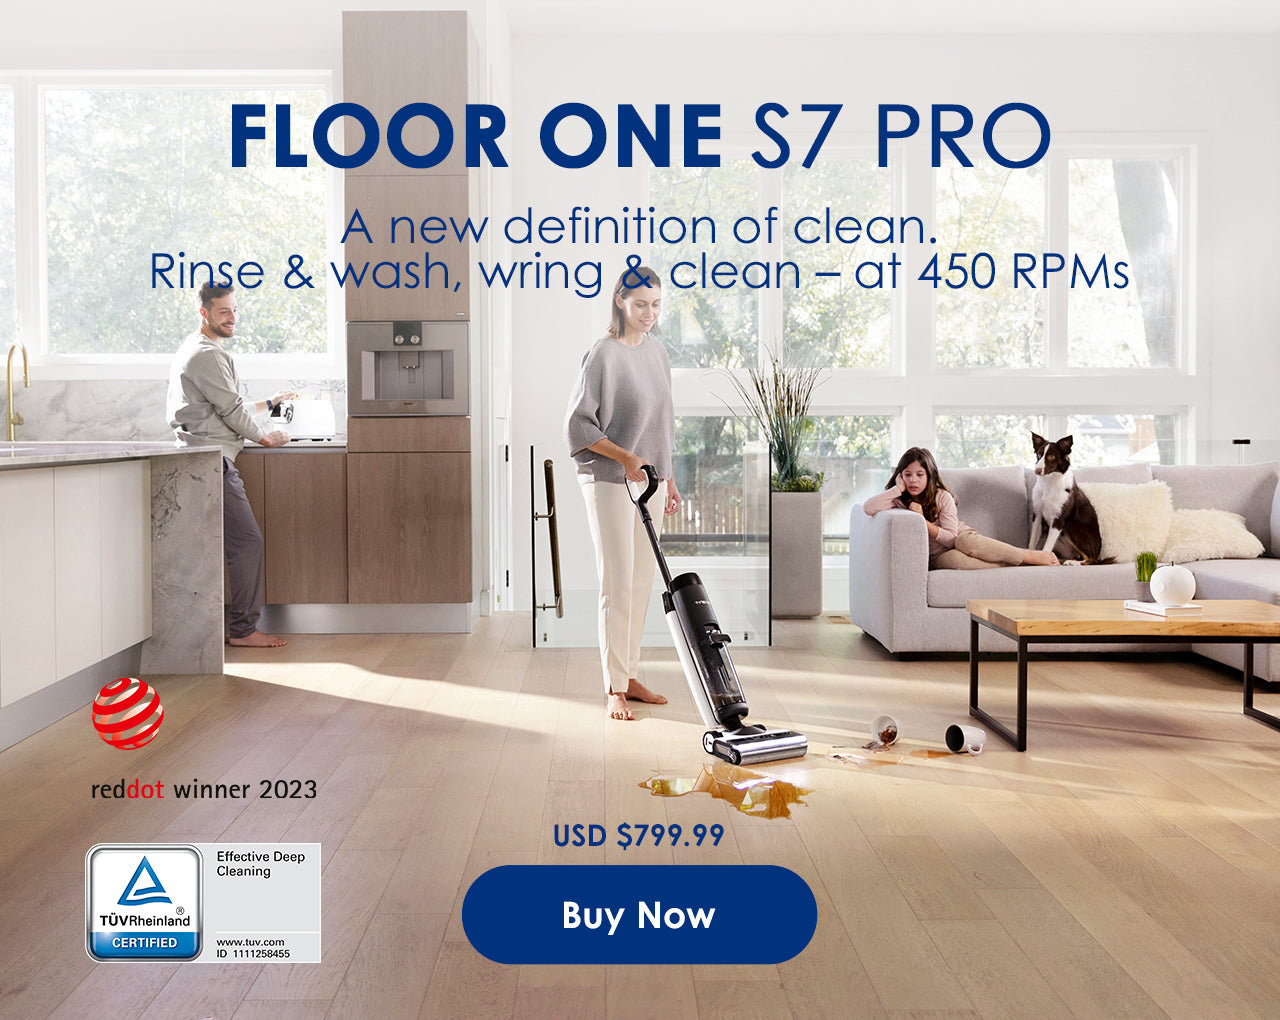 Introducing Tineco FLOOR ONE S7 PRO- a new definition of clean